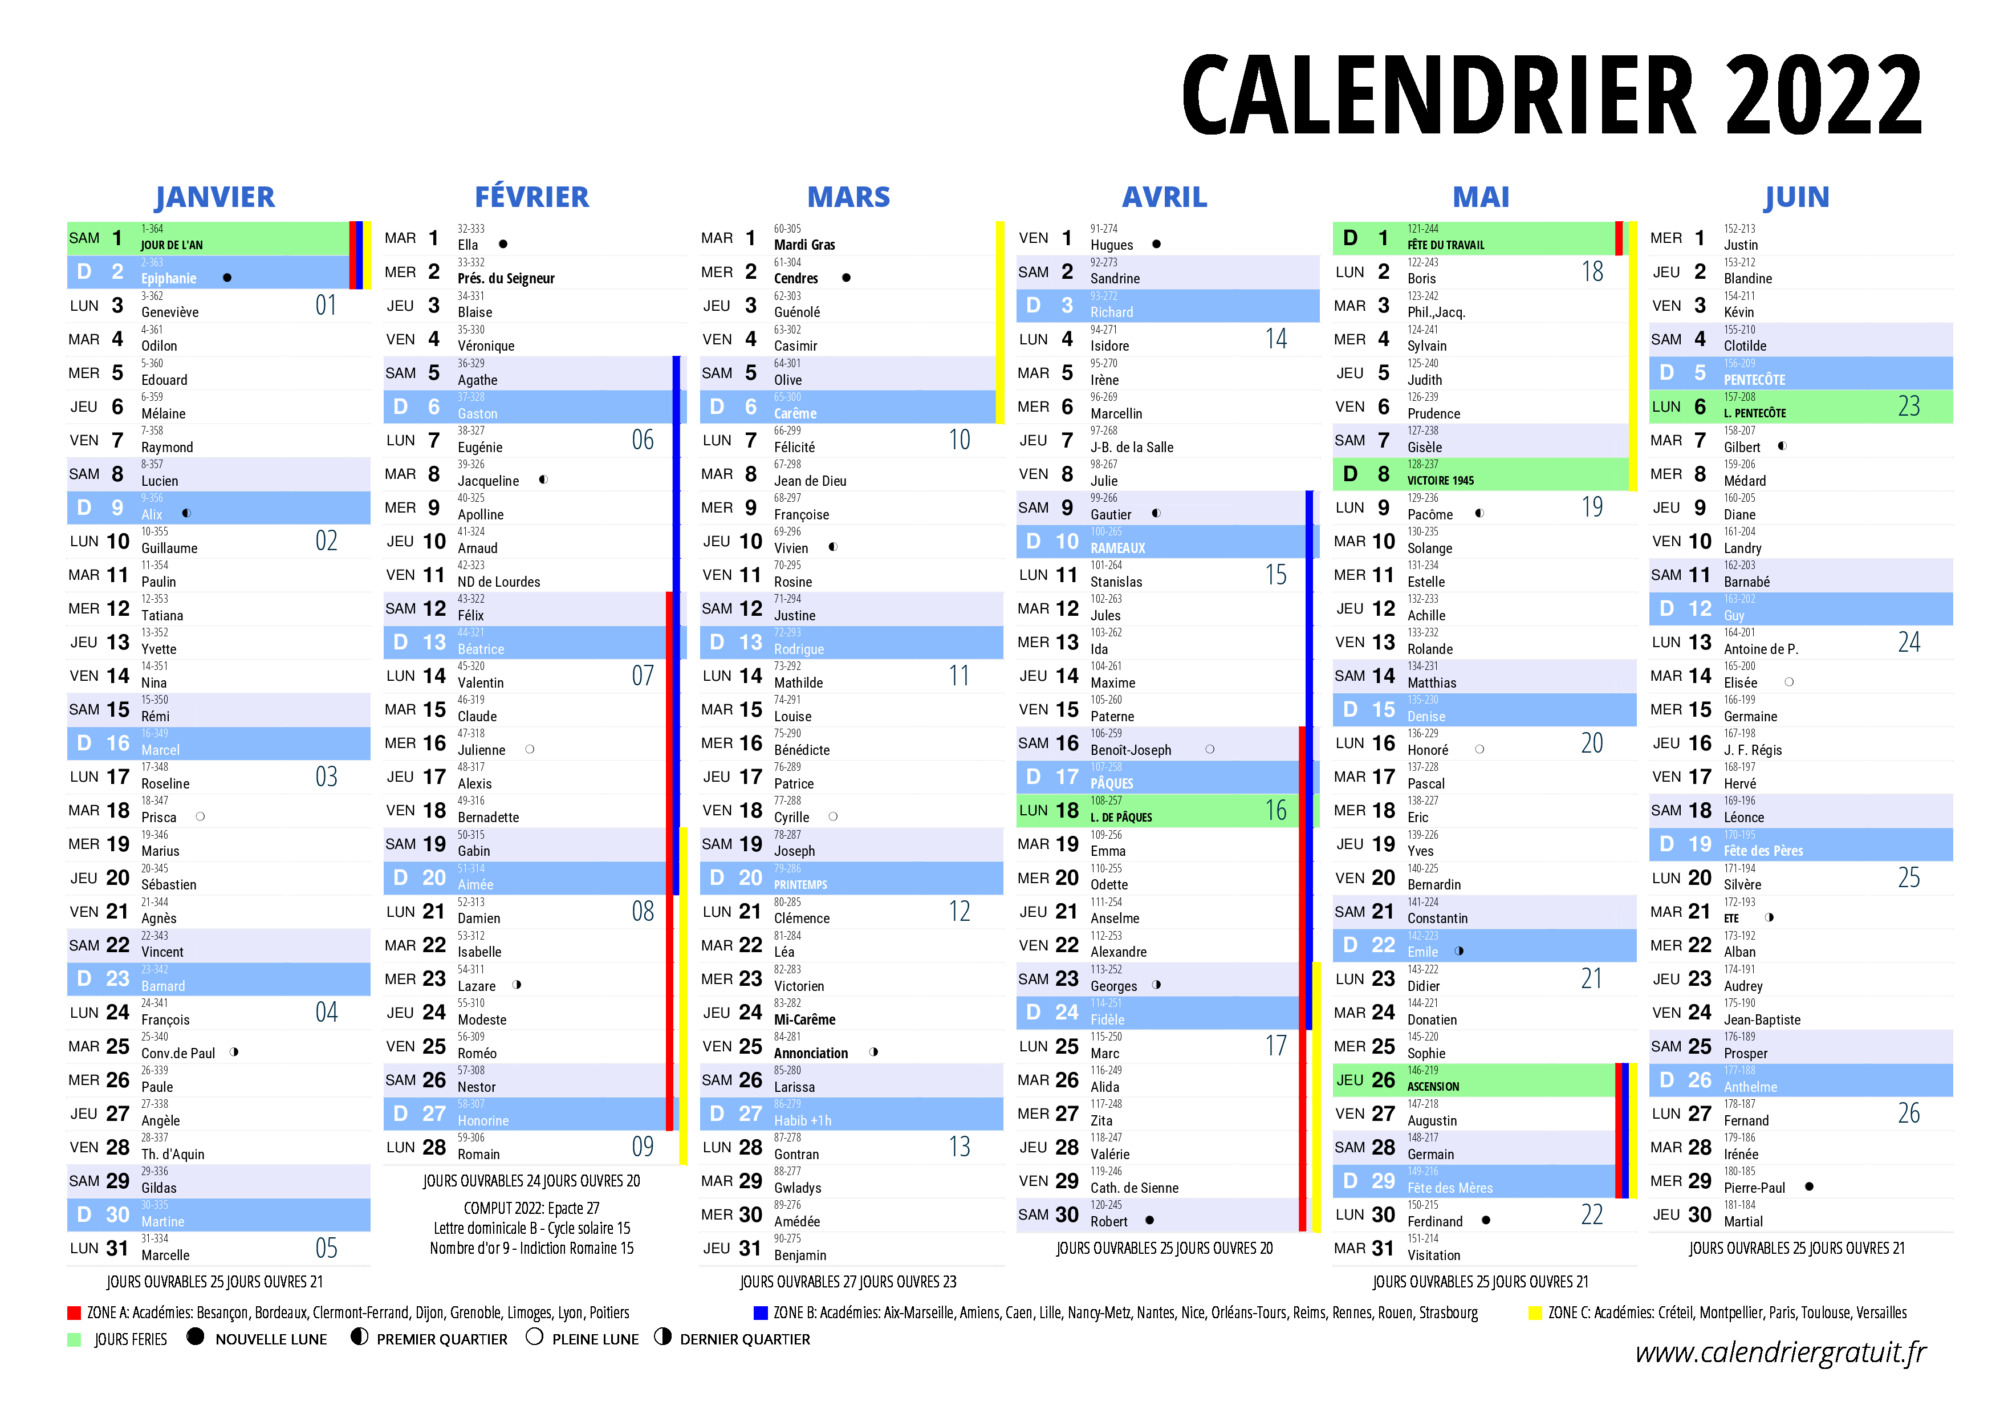 Calendrier 2022 Icalendrier Calendrier 2022